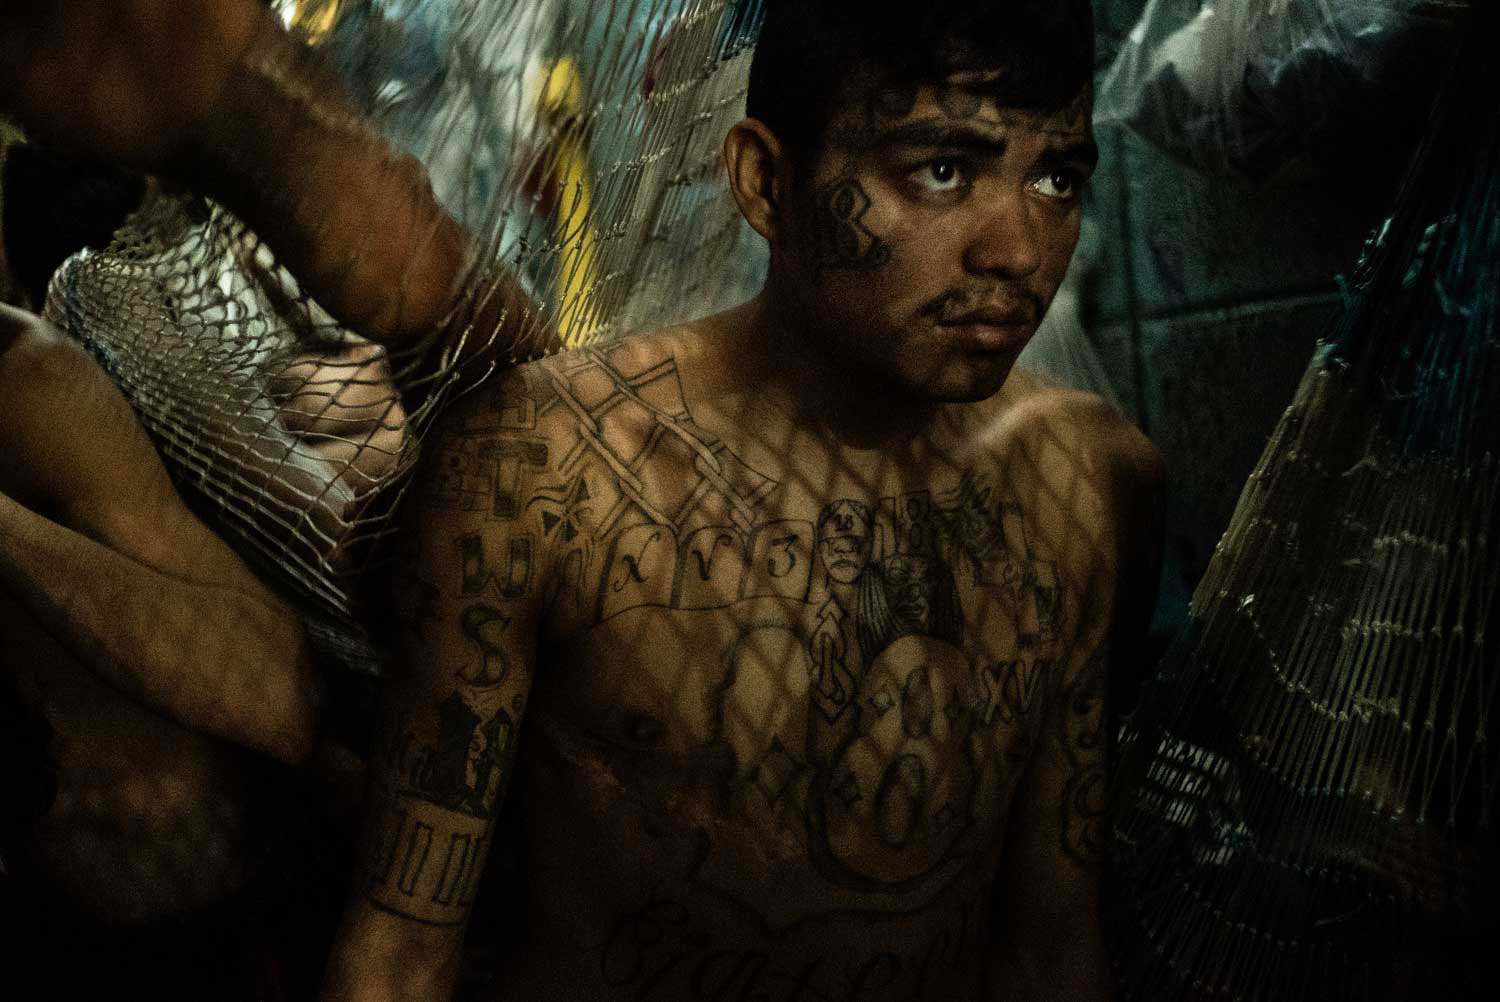 A cell inmate in the district of Soyapango, municipality in San Salvador, where police conducted a night raid in search of Mara Salvatrucha gang’s members. Alleged gang members are handcuffed, identified, and then put into the barltolina, an overcrowded temporary cell at police headquarters.